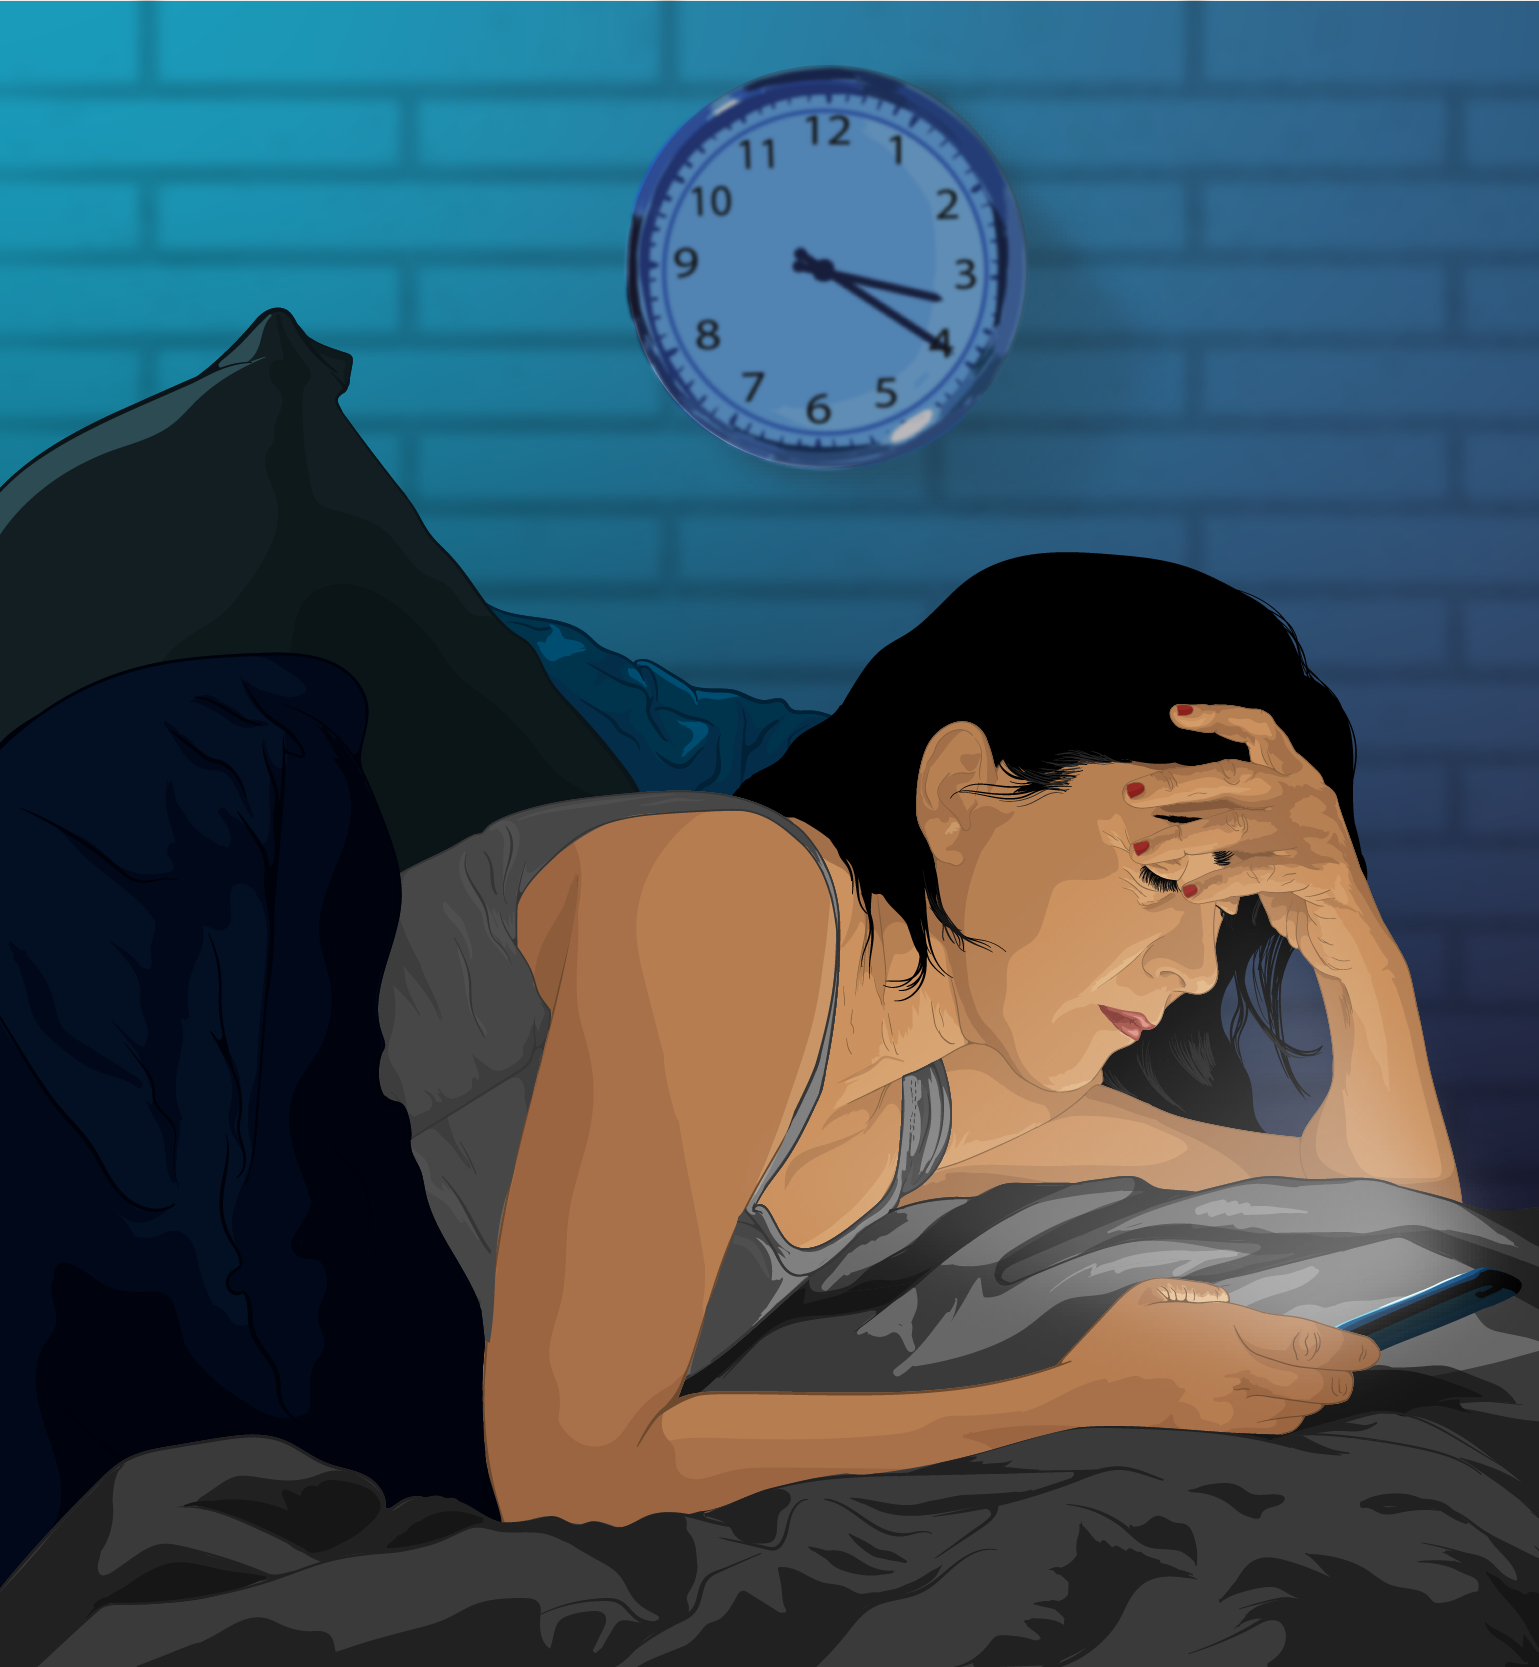 Bedtime procrastination: Sleeping less due to a lack of personal freedom during the day